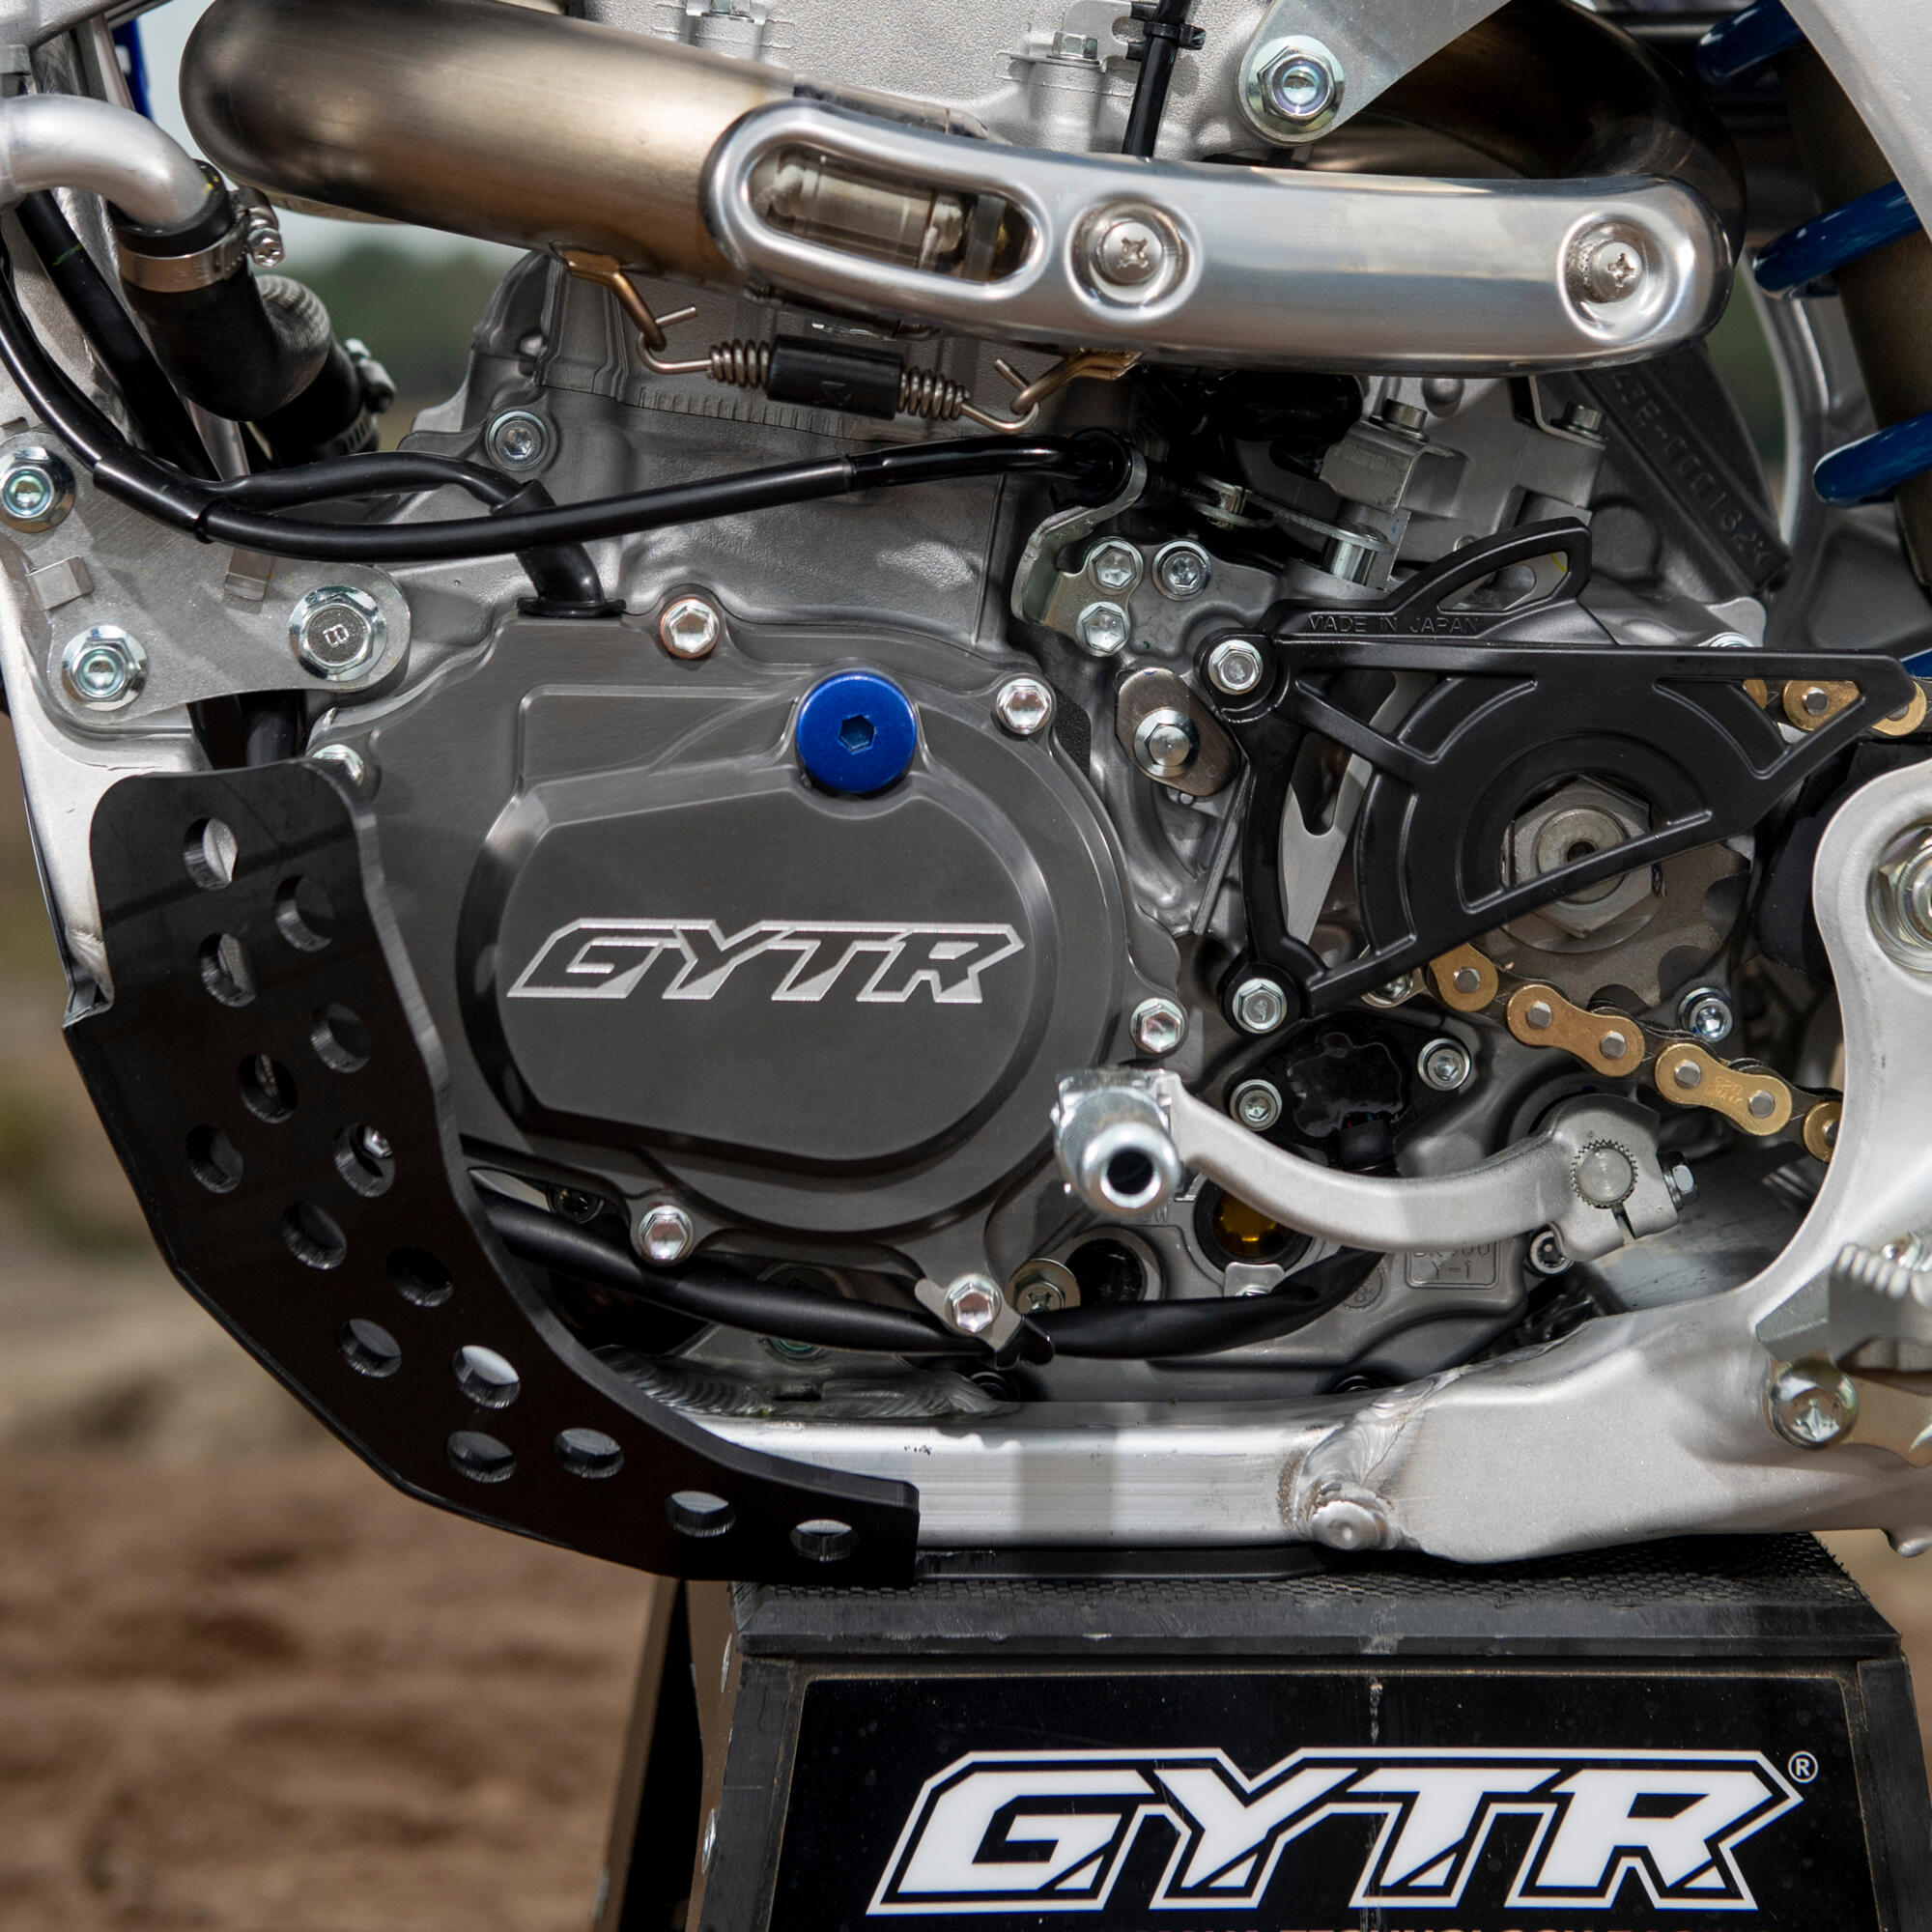 GYTR® Billet Ignition Cover - Accessories - Yamaha Motor